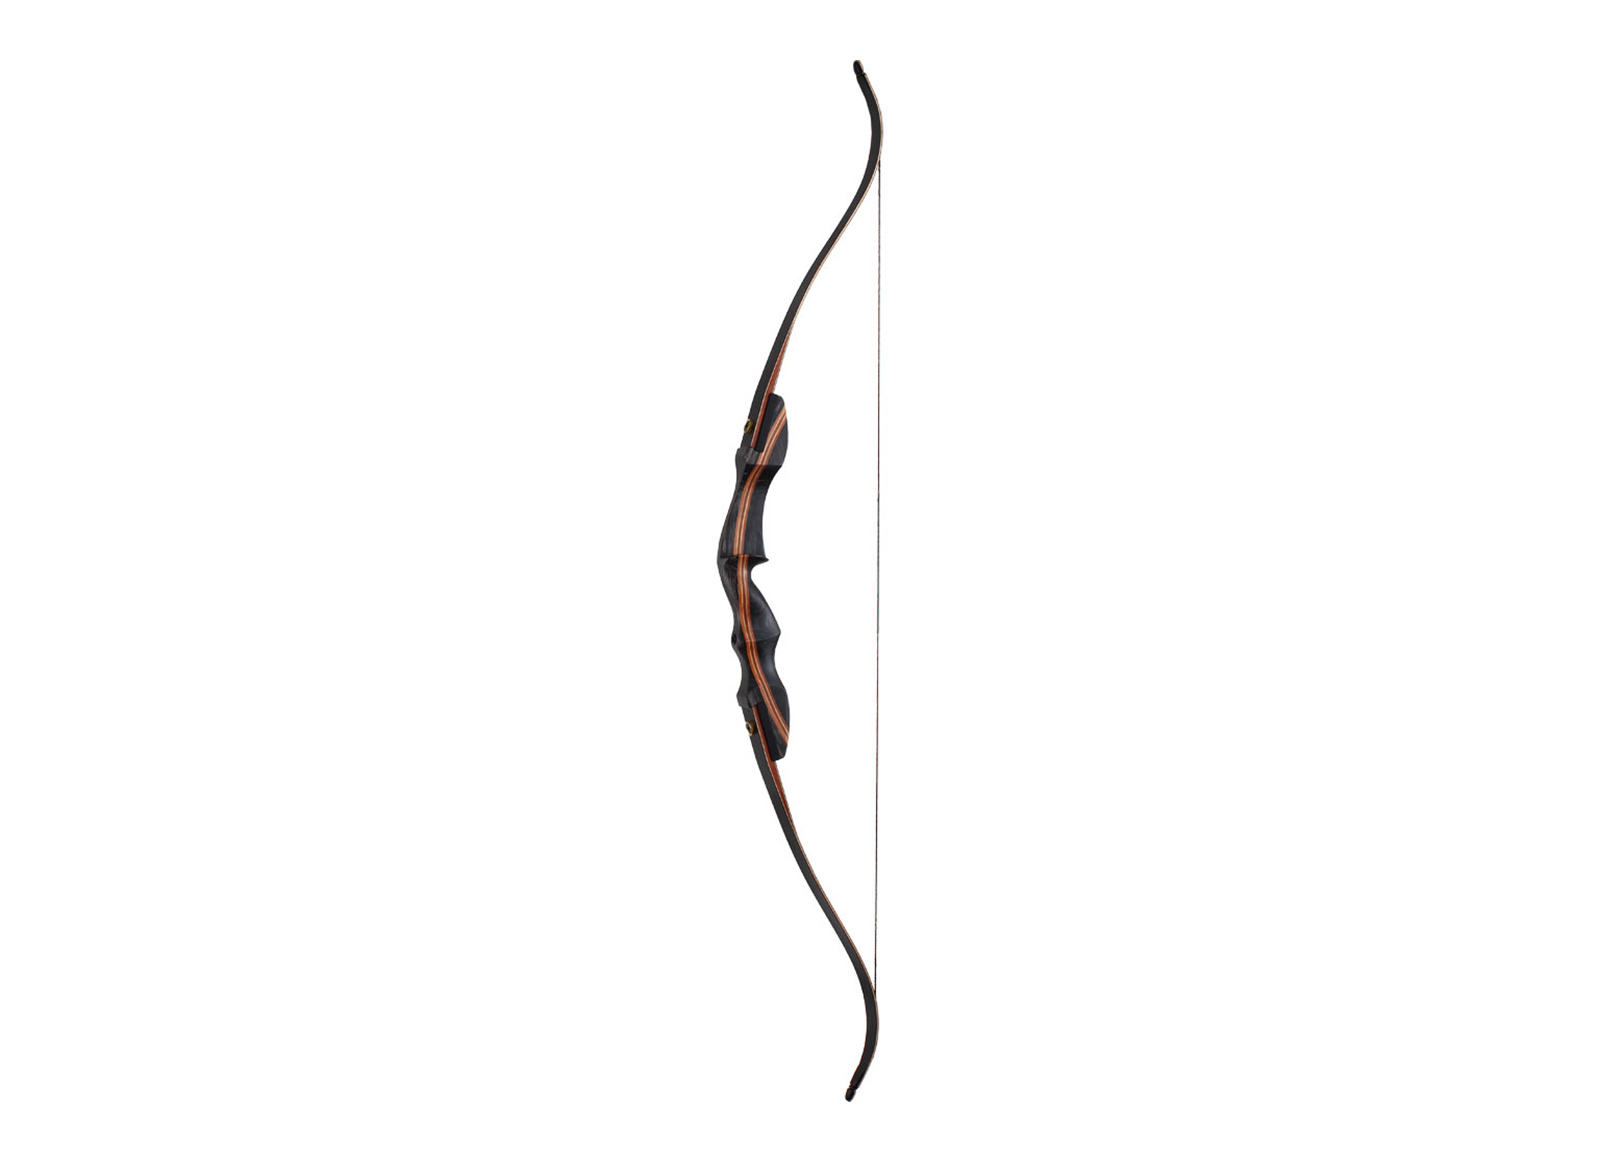 BEARPAW TAKE DOWN RECURVE BOW MOHICAN